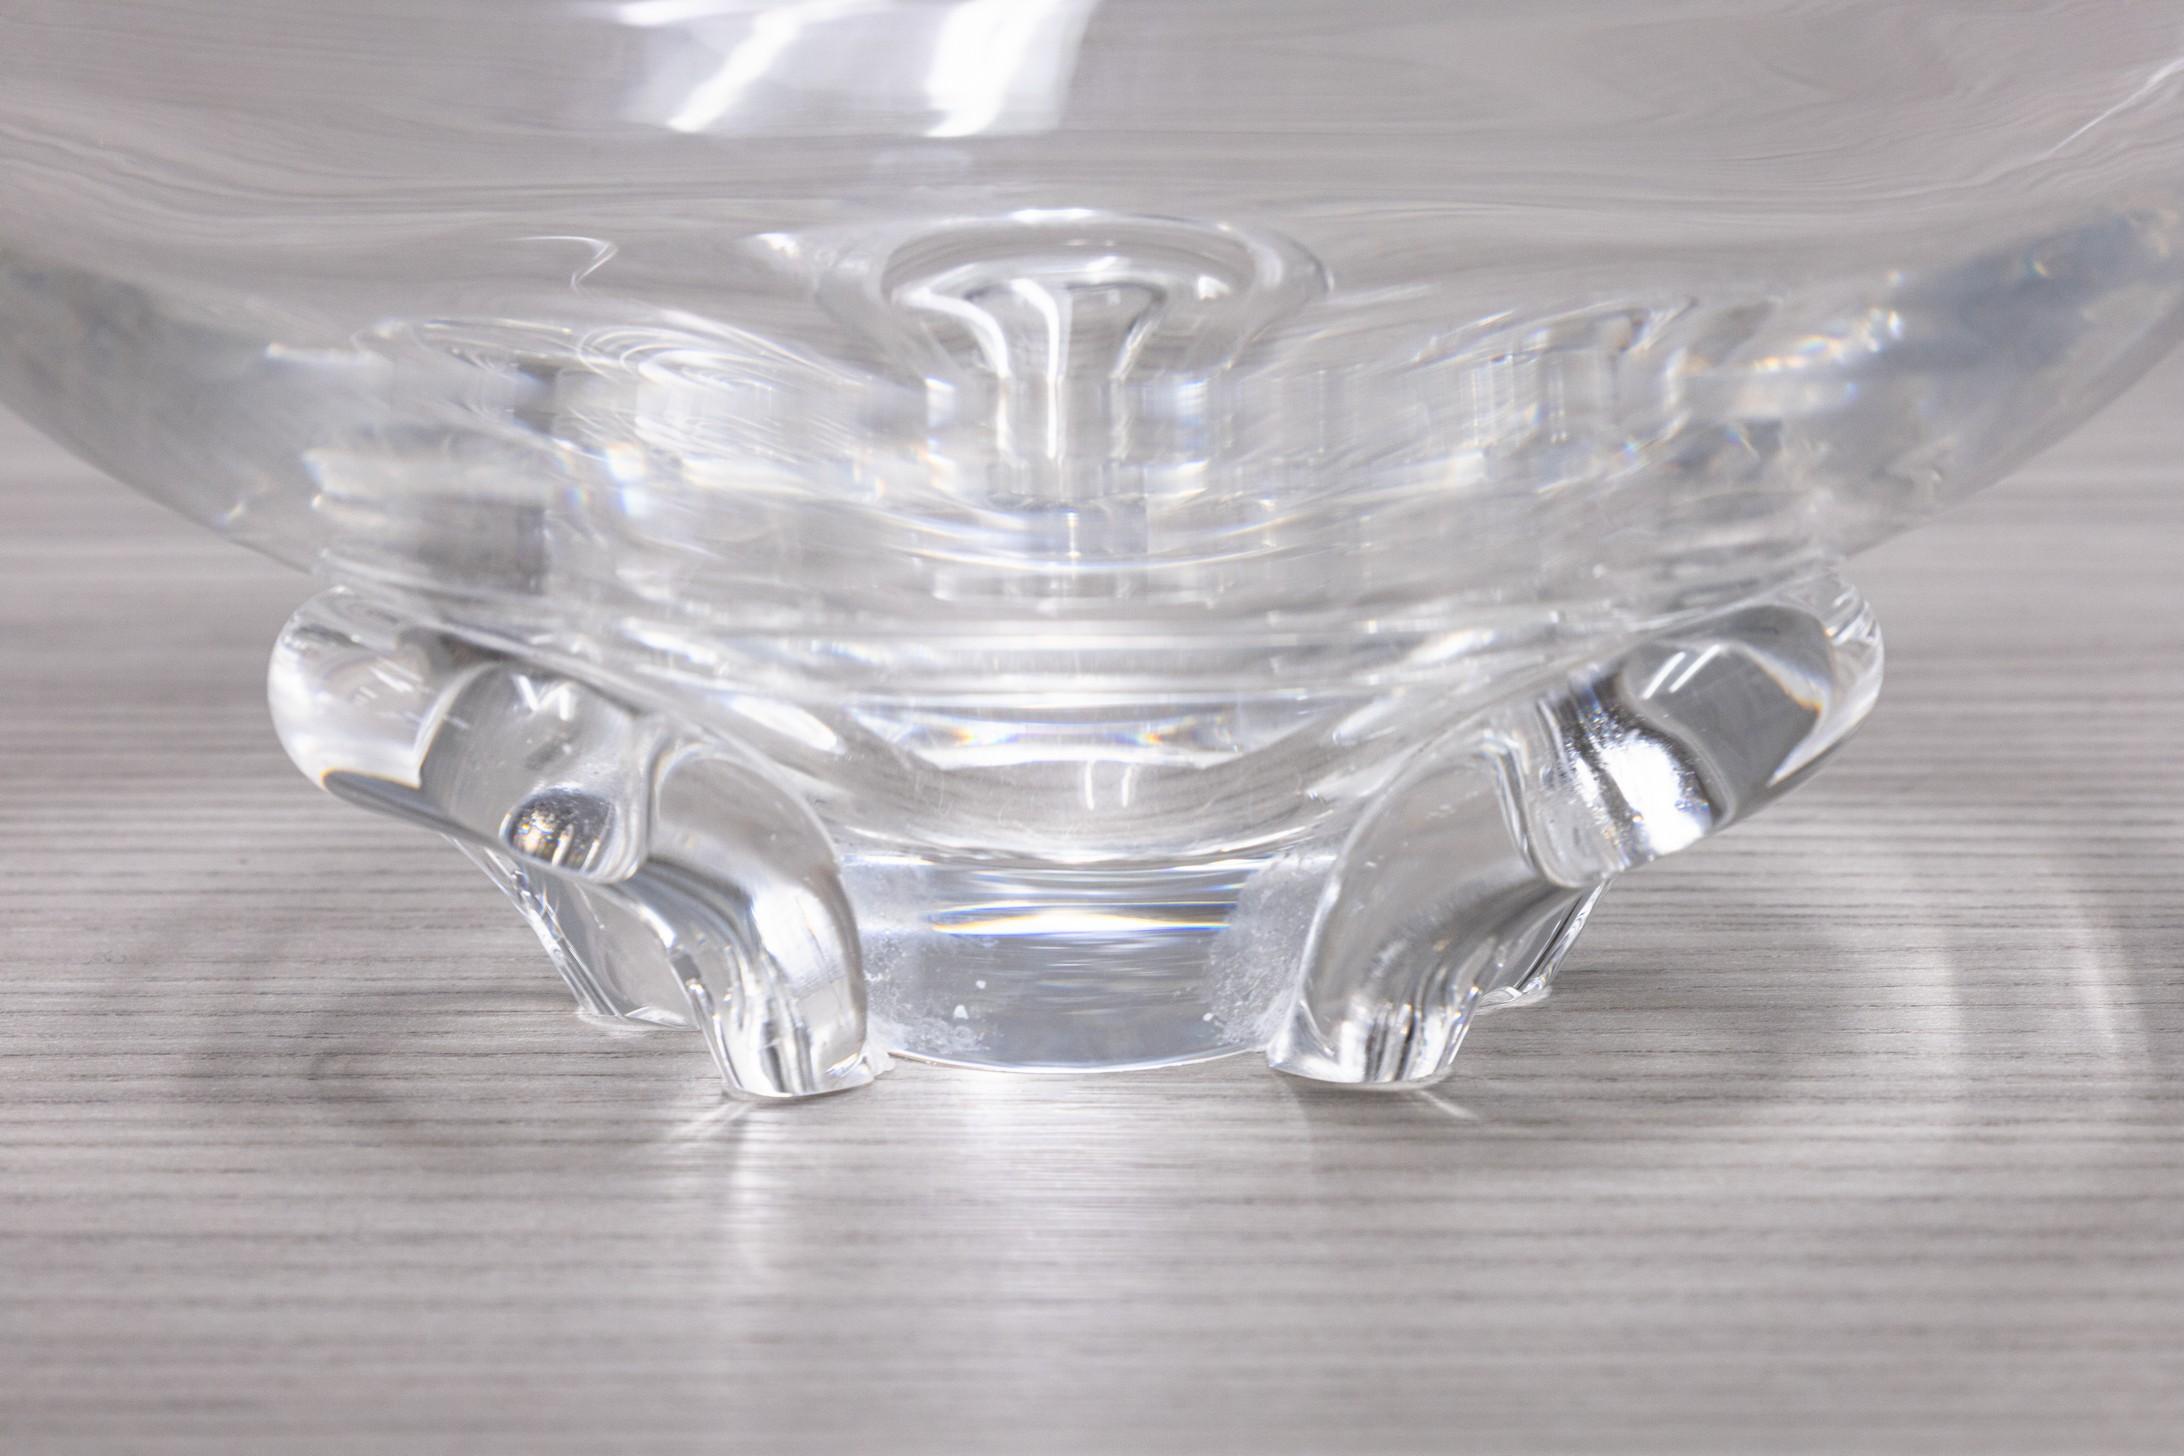 Donald Pollard for Steuben 8059 Trillium Floret Crystal Bowl Contemporary Modern In Good Condition For Sale In Keego Harbor, MI